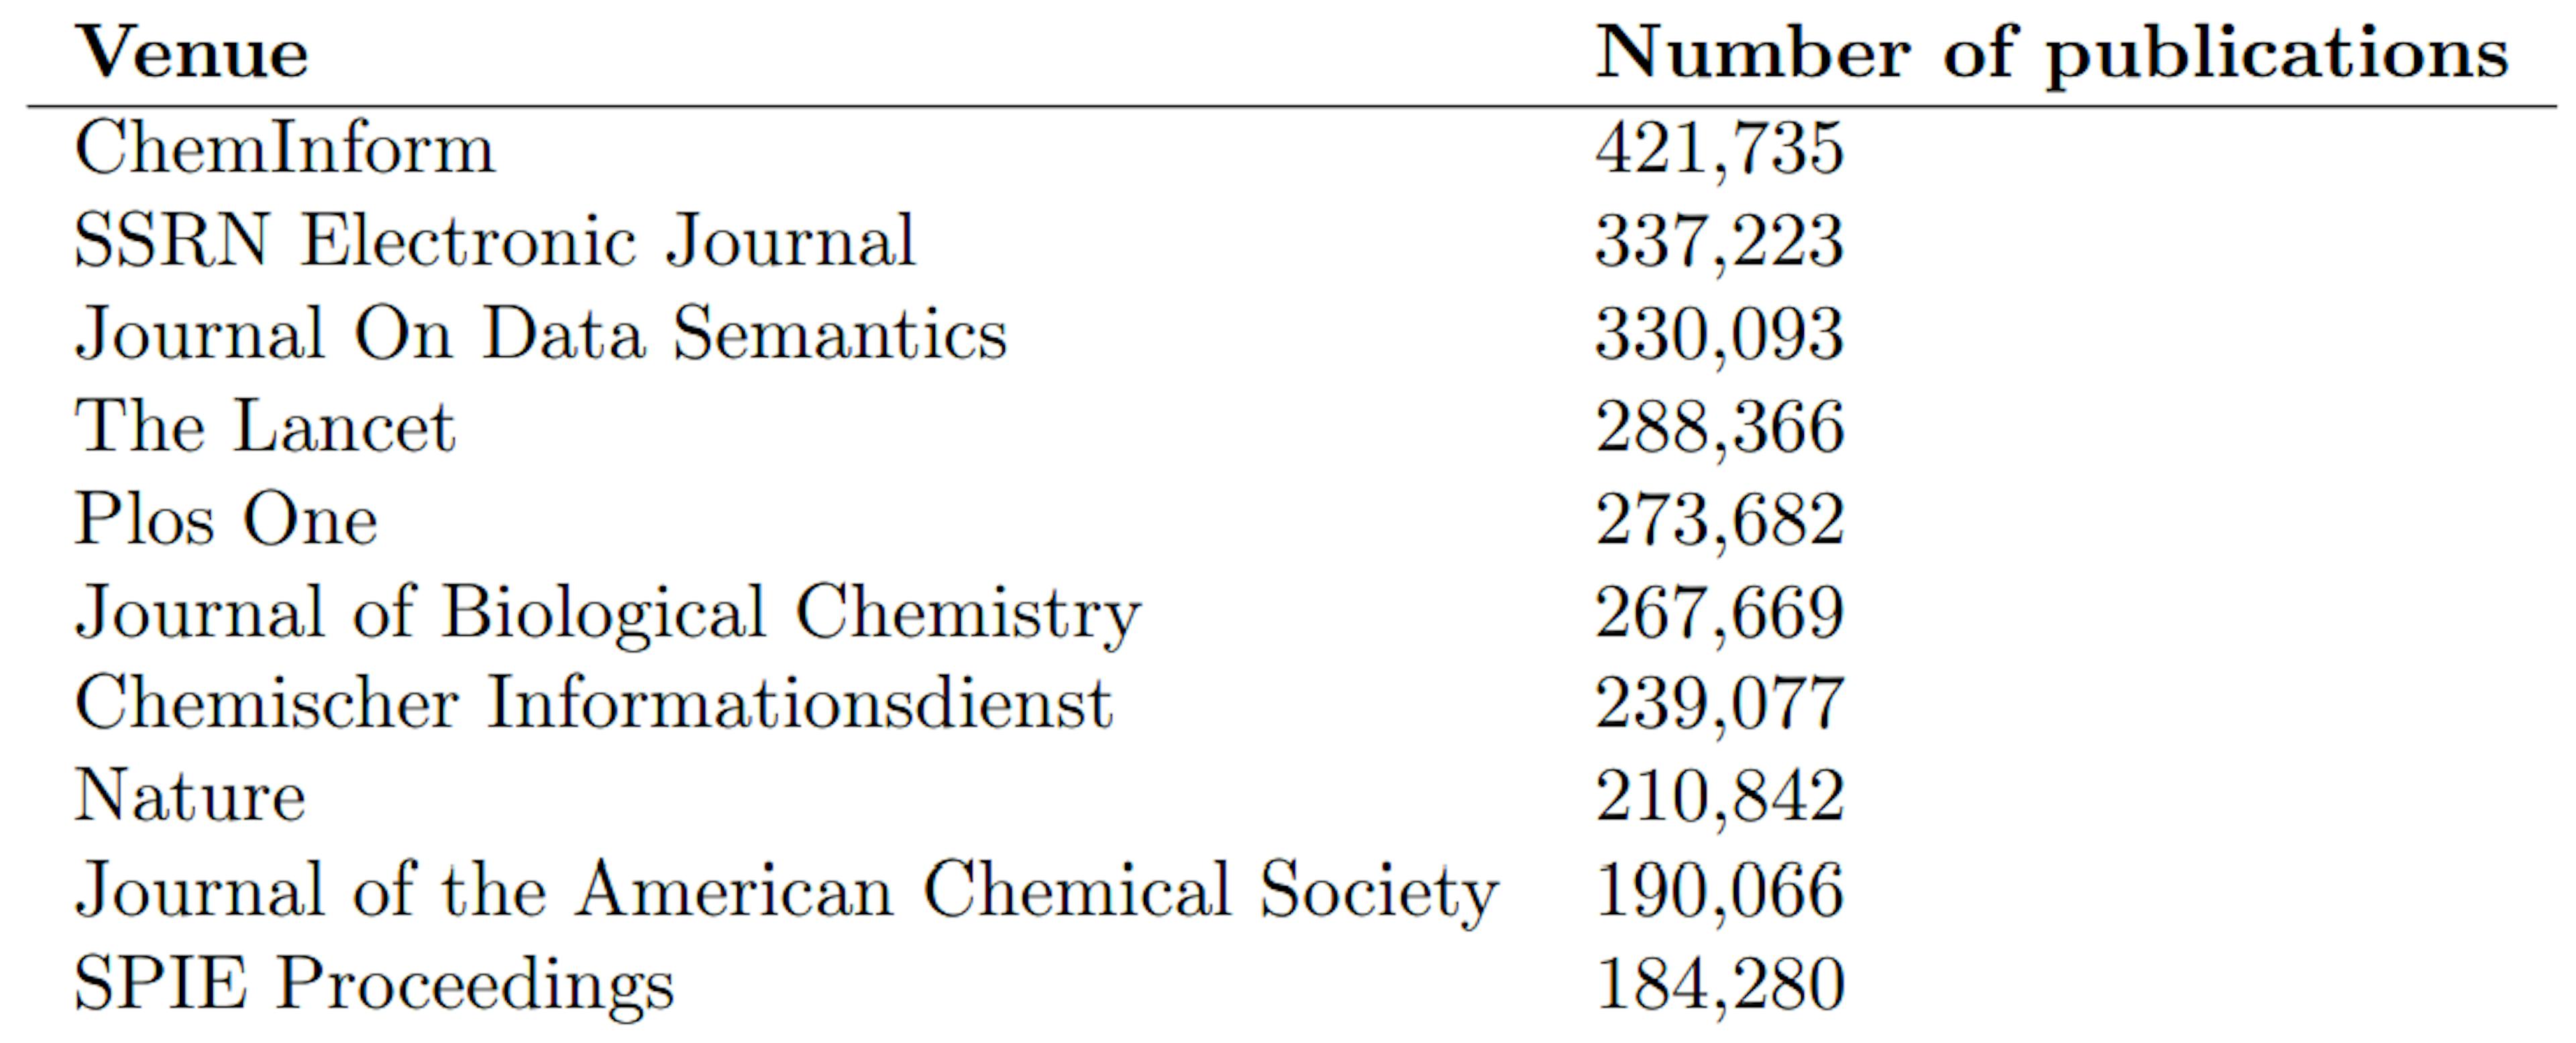 Table 4: The top ten venues by number of publications